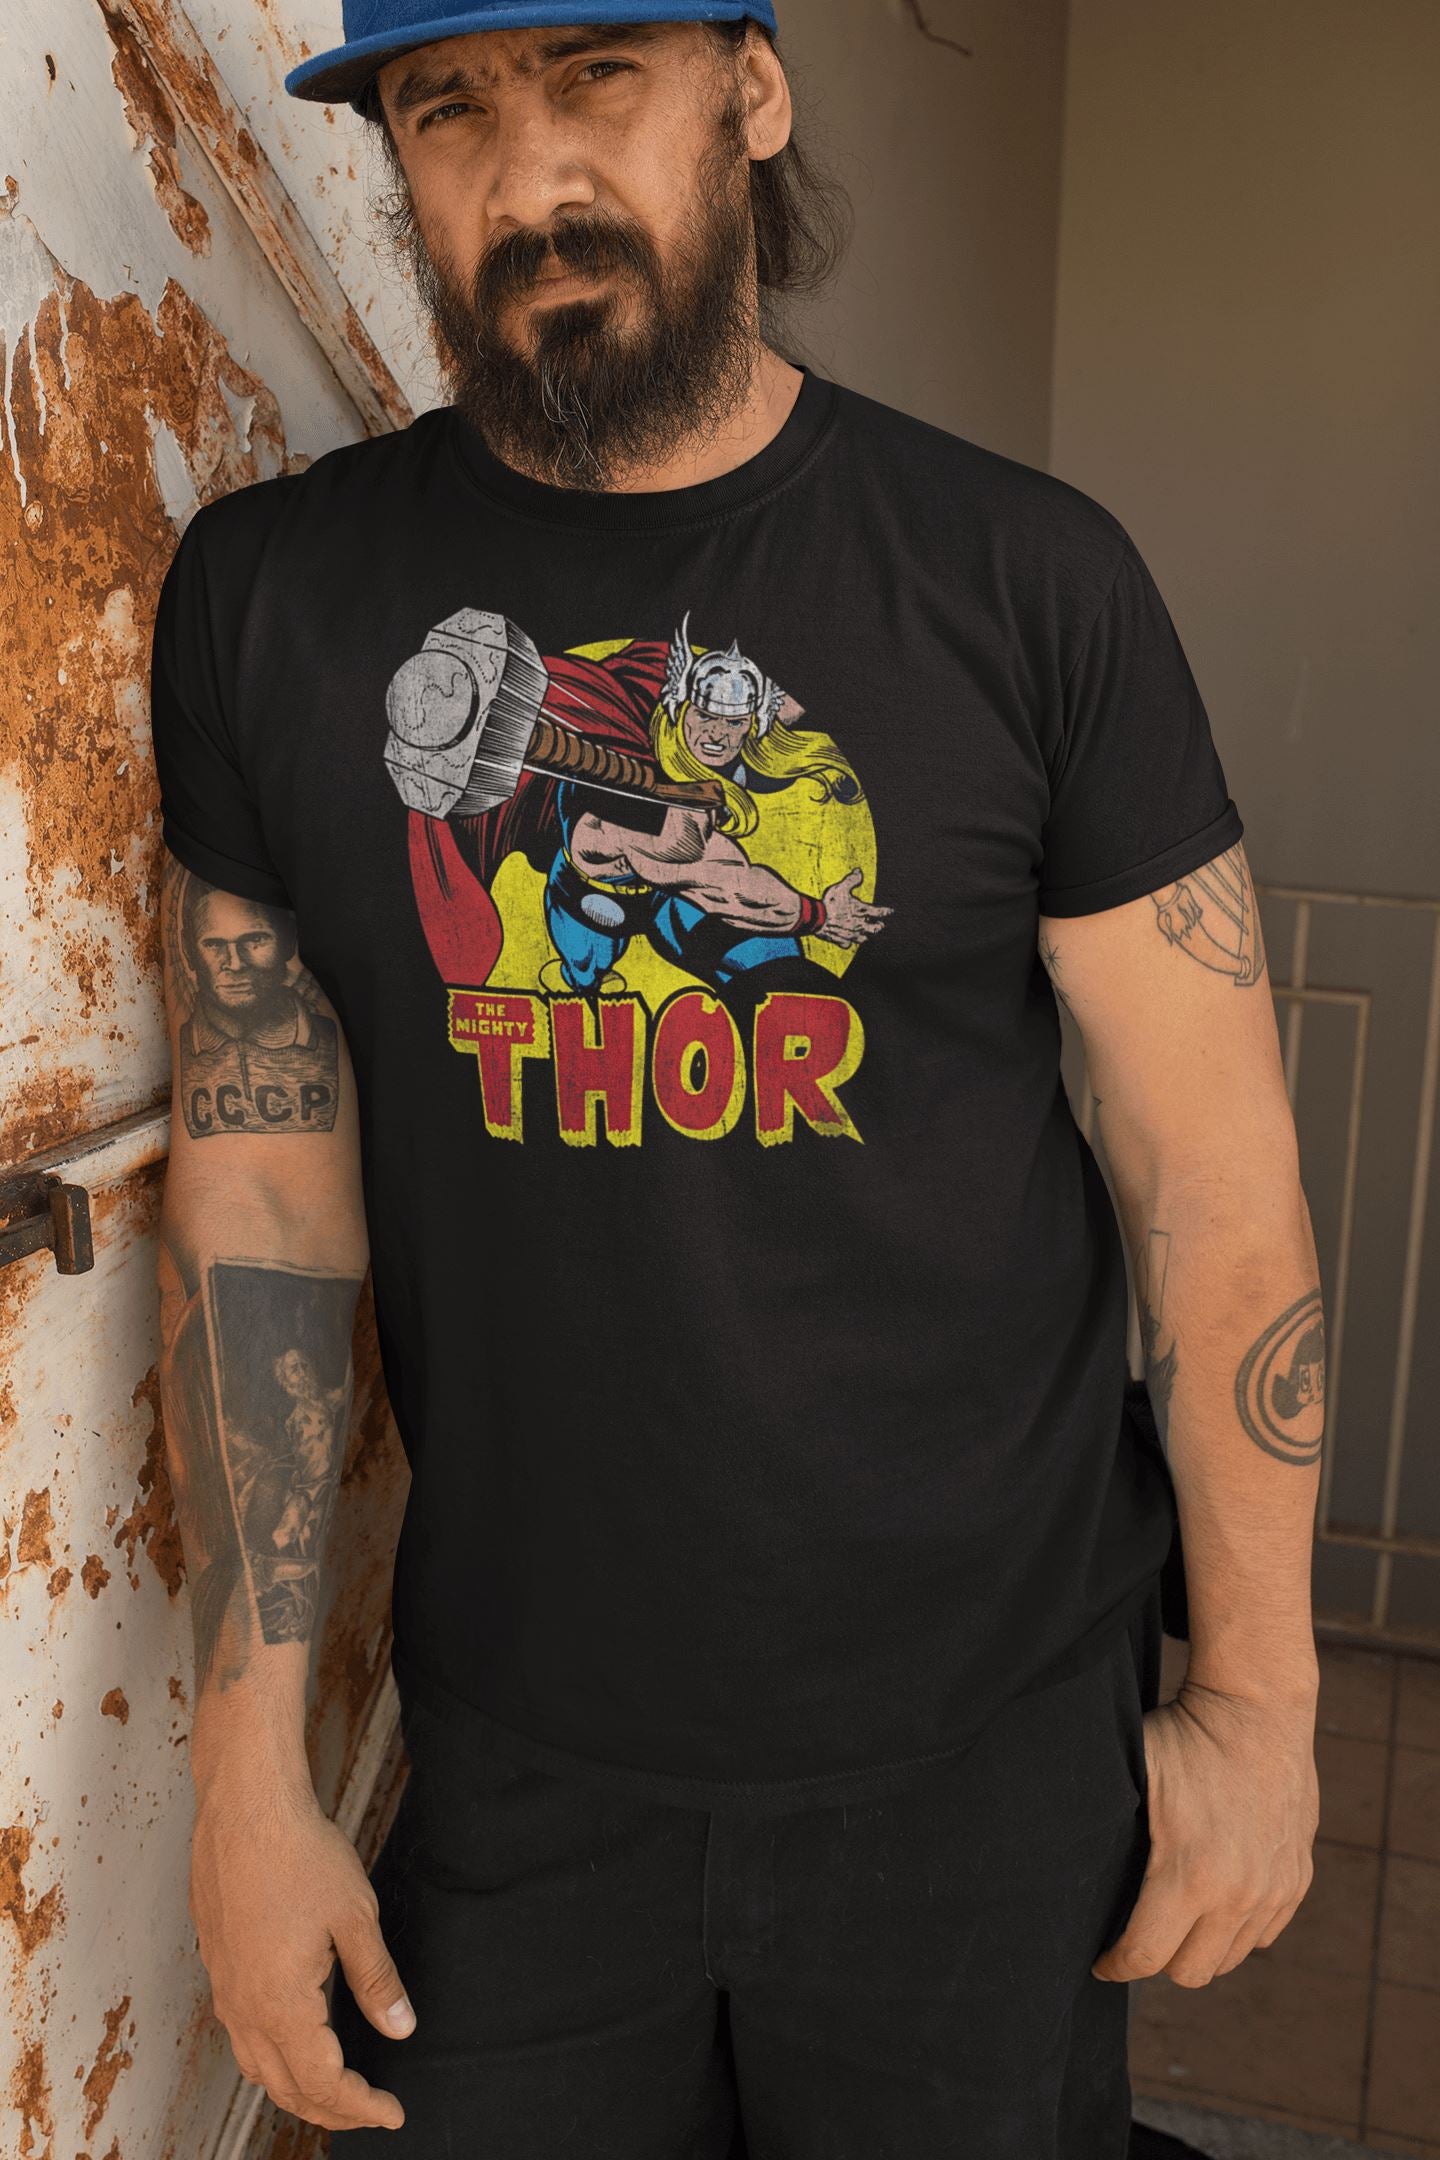 Comics The Mighty Thor Throwing His Hammer 3D Effect Exclusive T